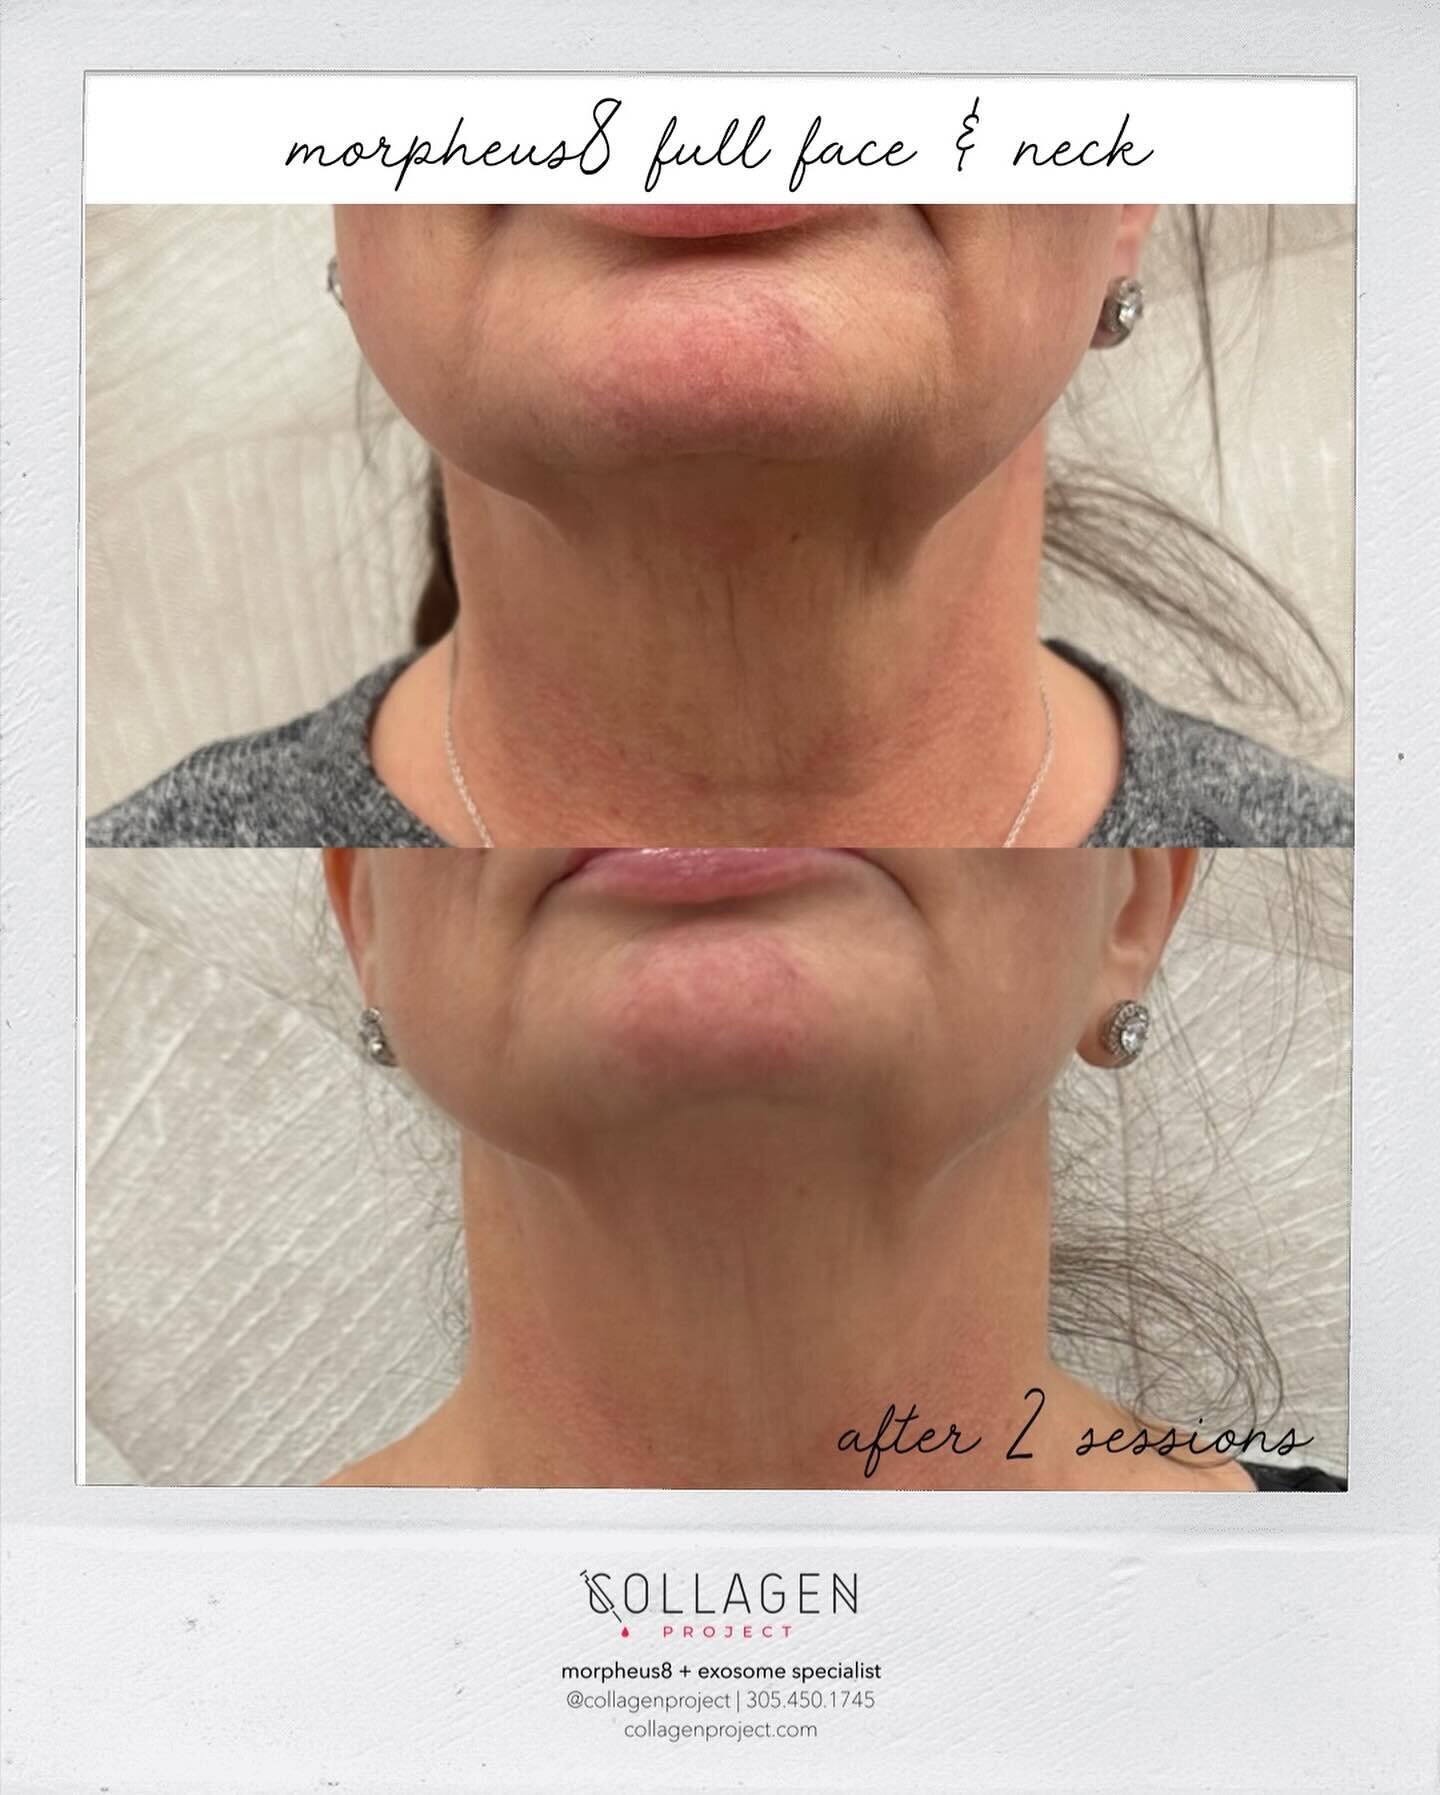 Morpheus8 full face &amp; neck ✨
Morpheus8, the revolutionary micro-needling non-surgical cosmetic treatment, can address many skin concerns, including saggy skin. Using tiny needles to create microchannels in the skin, Morpheus8 stimulates collagen 